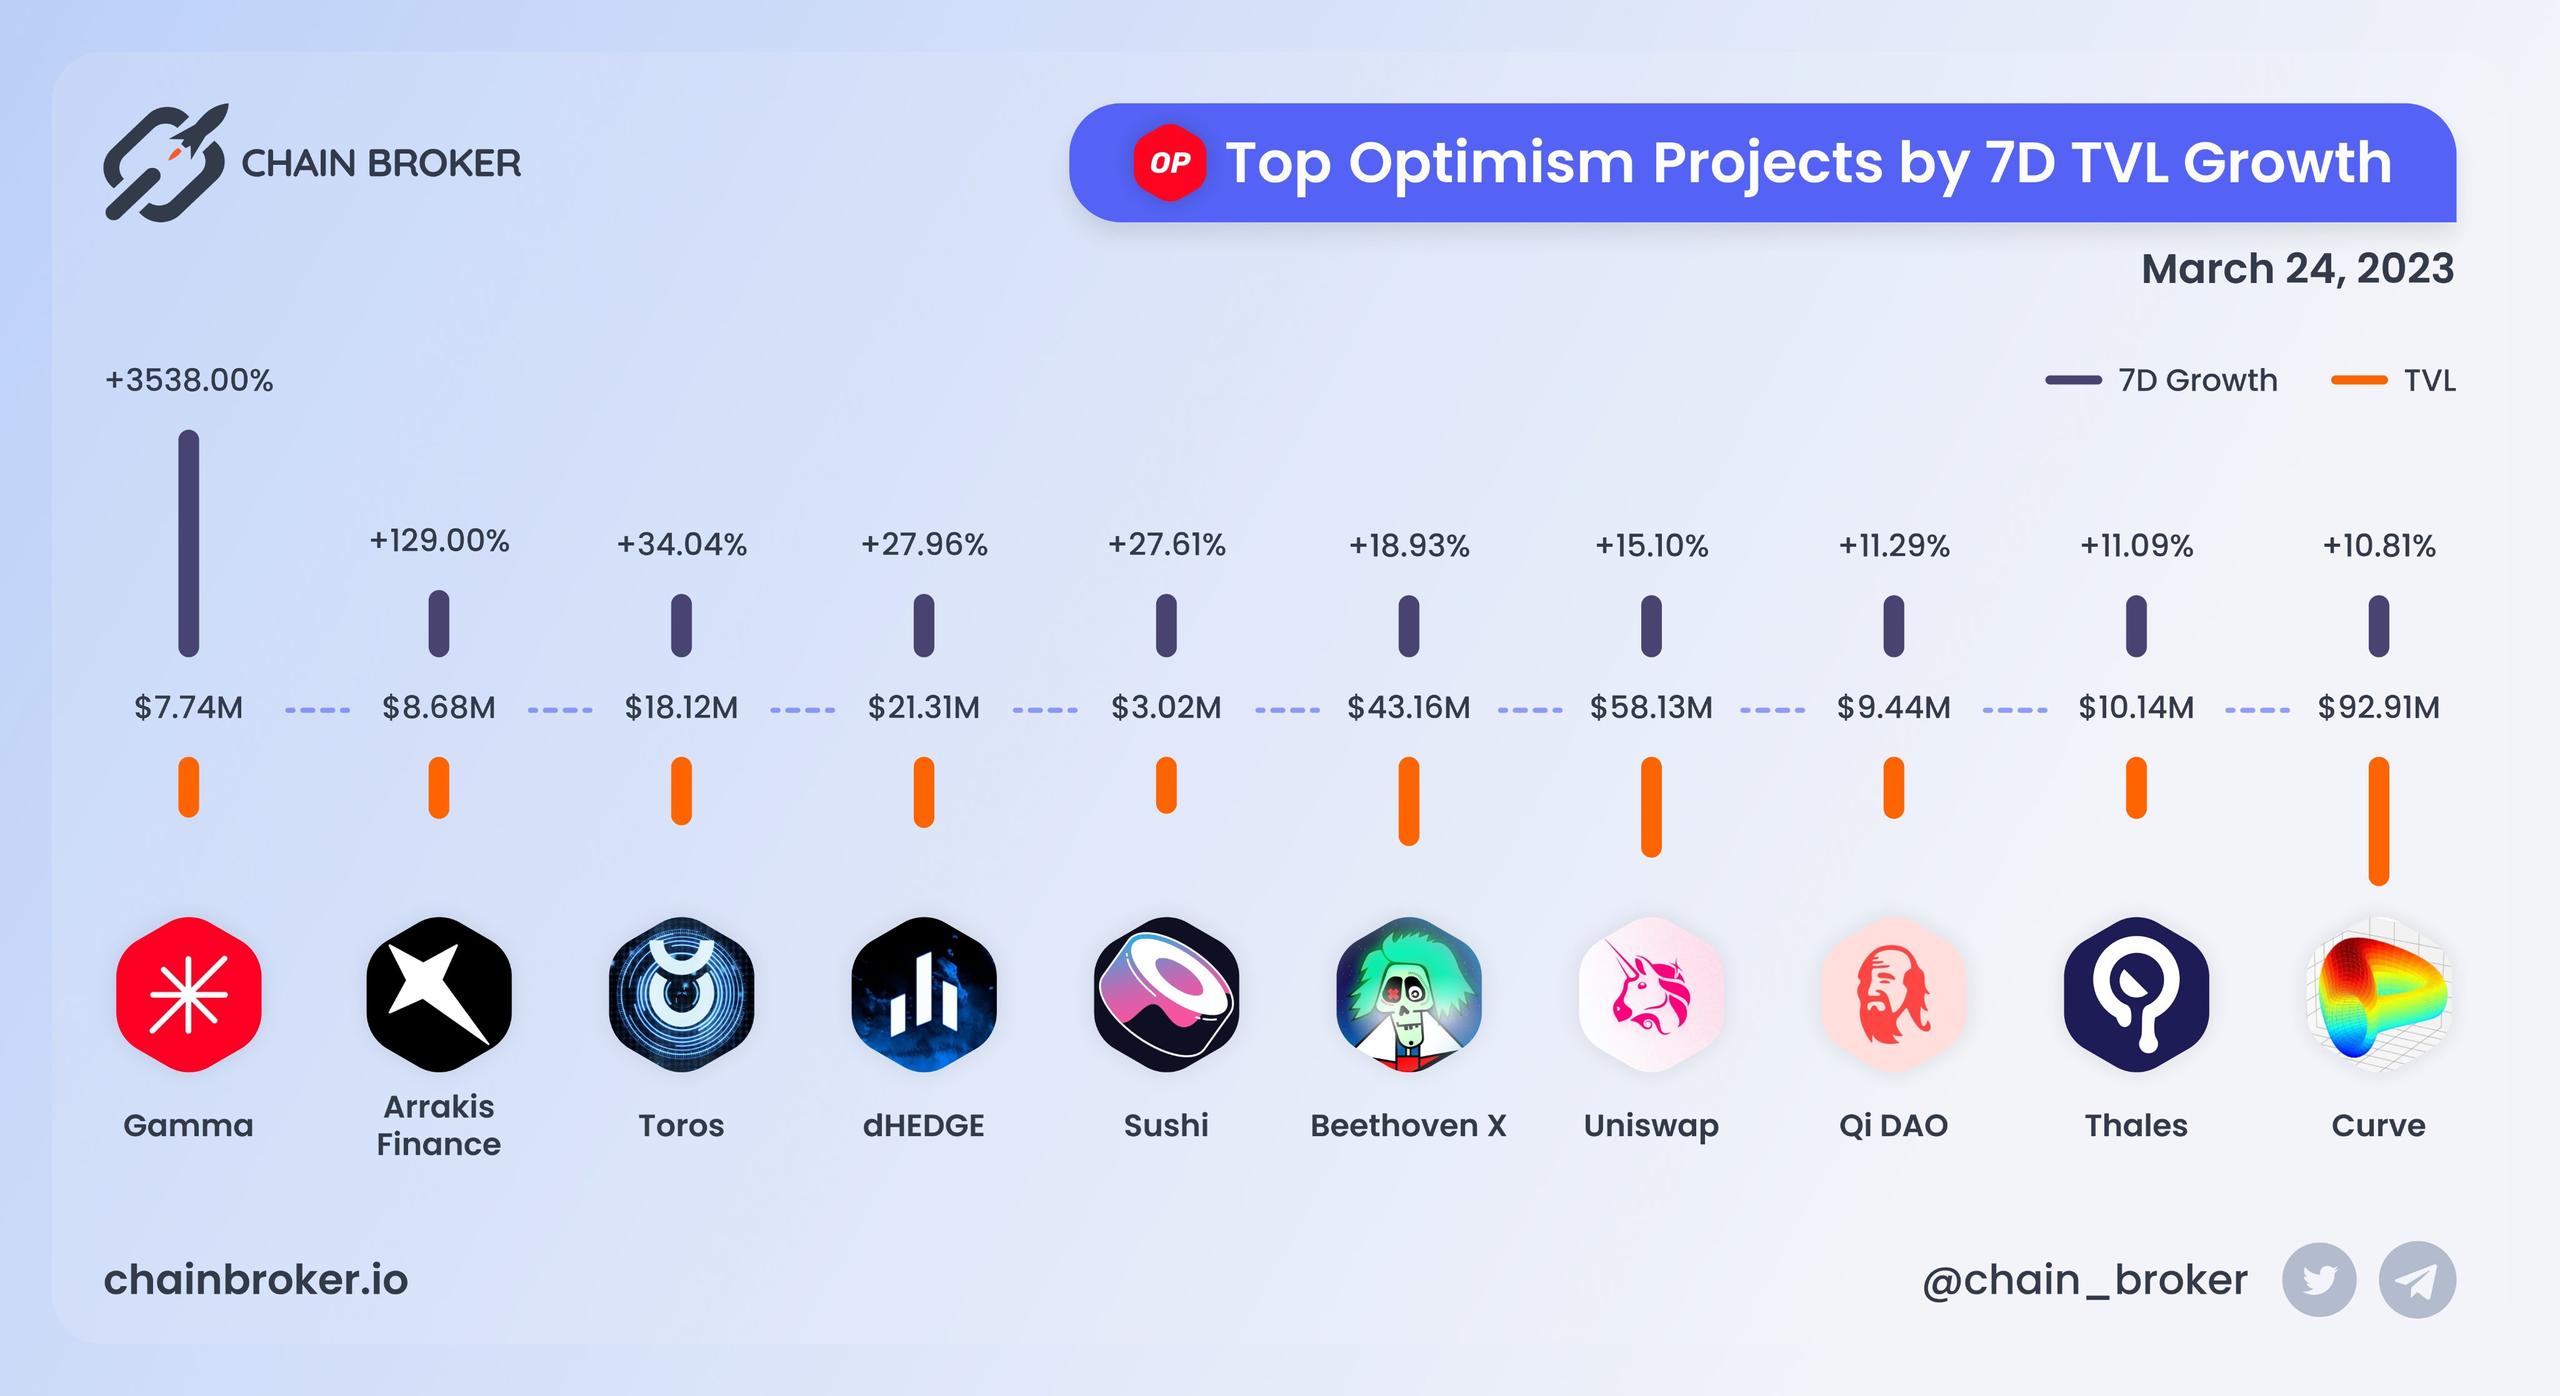 Top Optimism projects by 7D TVL growth